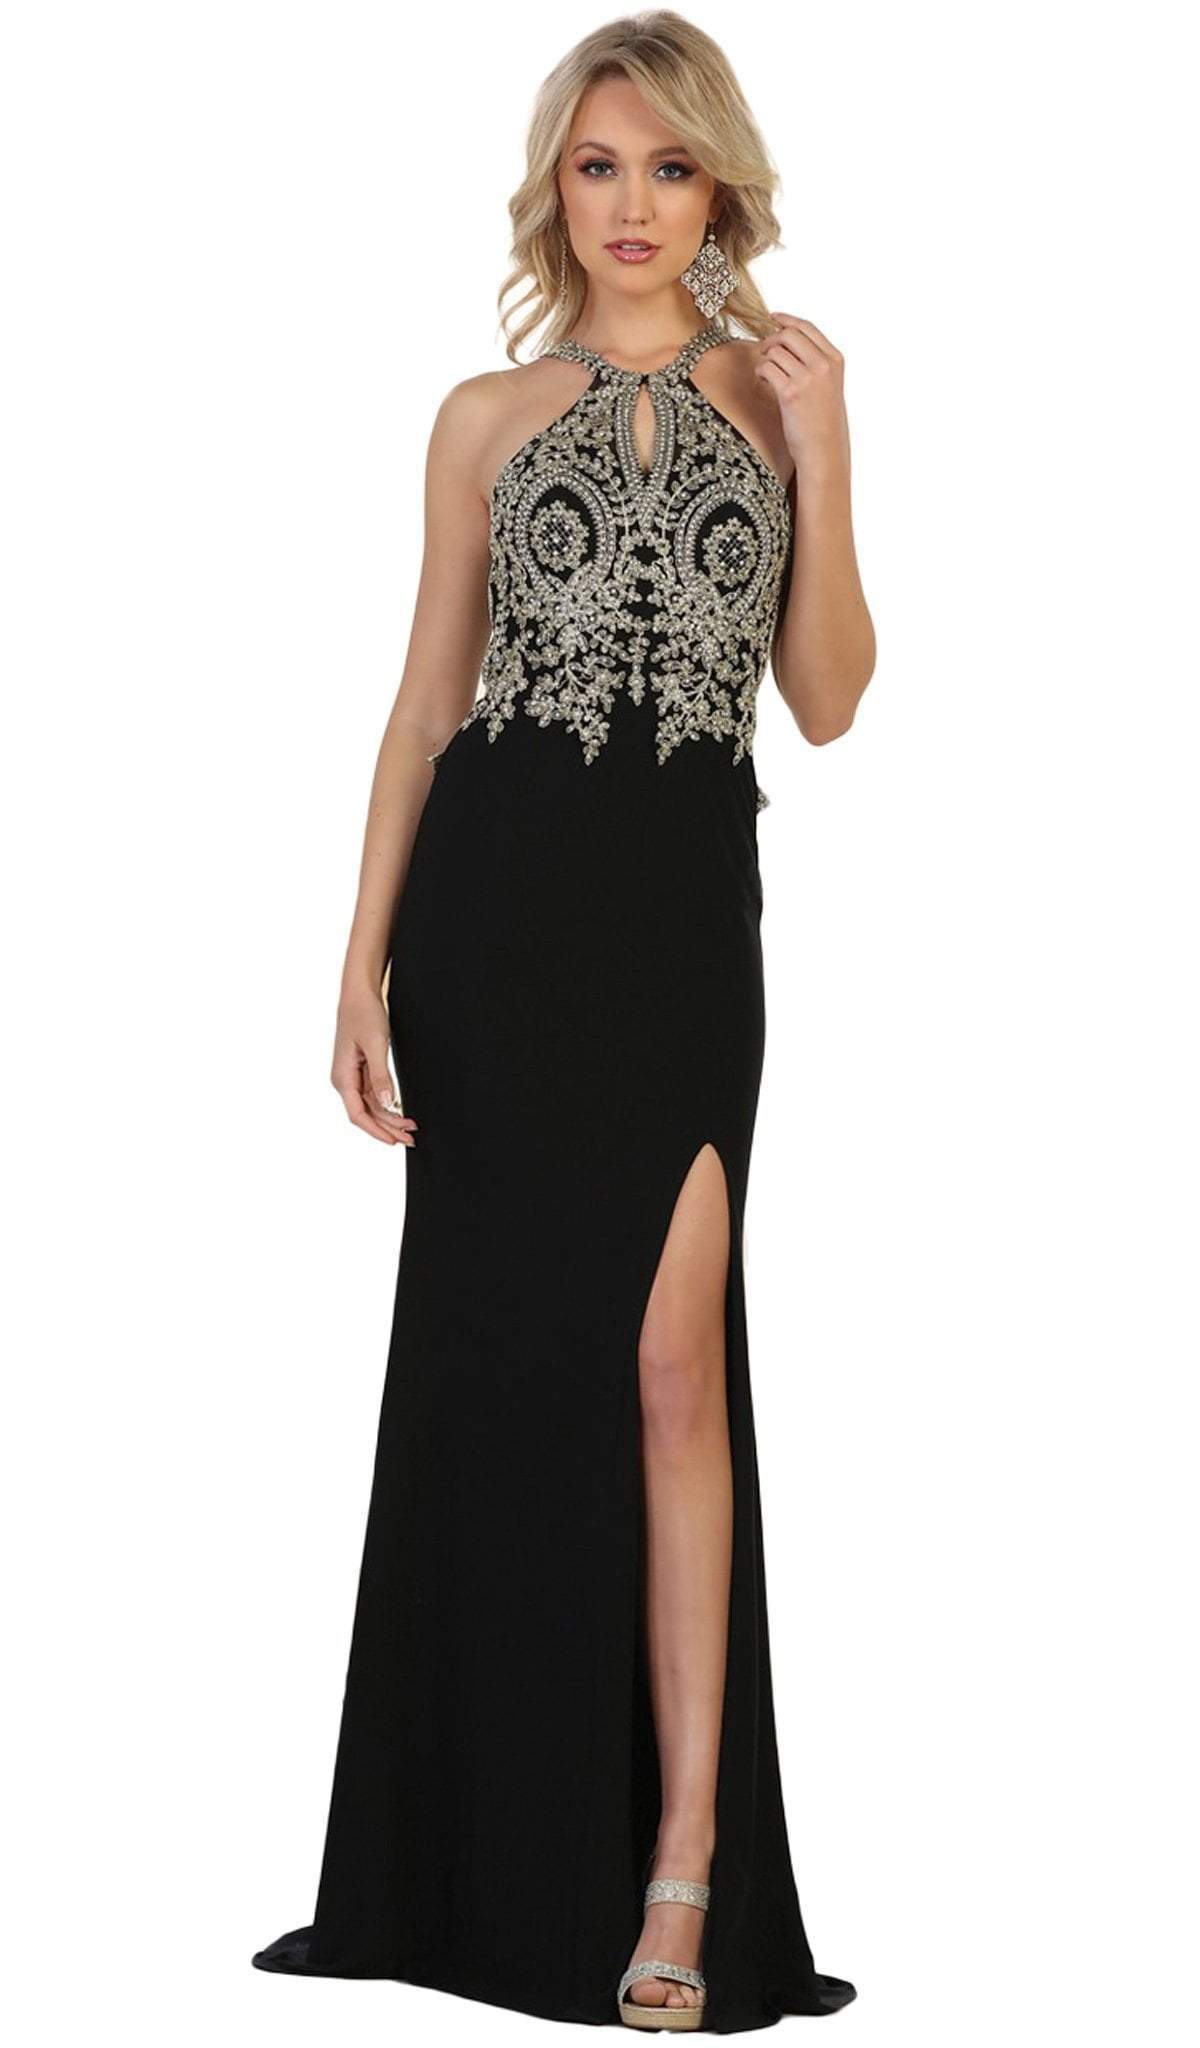 May Queen - Embellished Halter Sheath Evening Gown